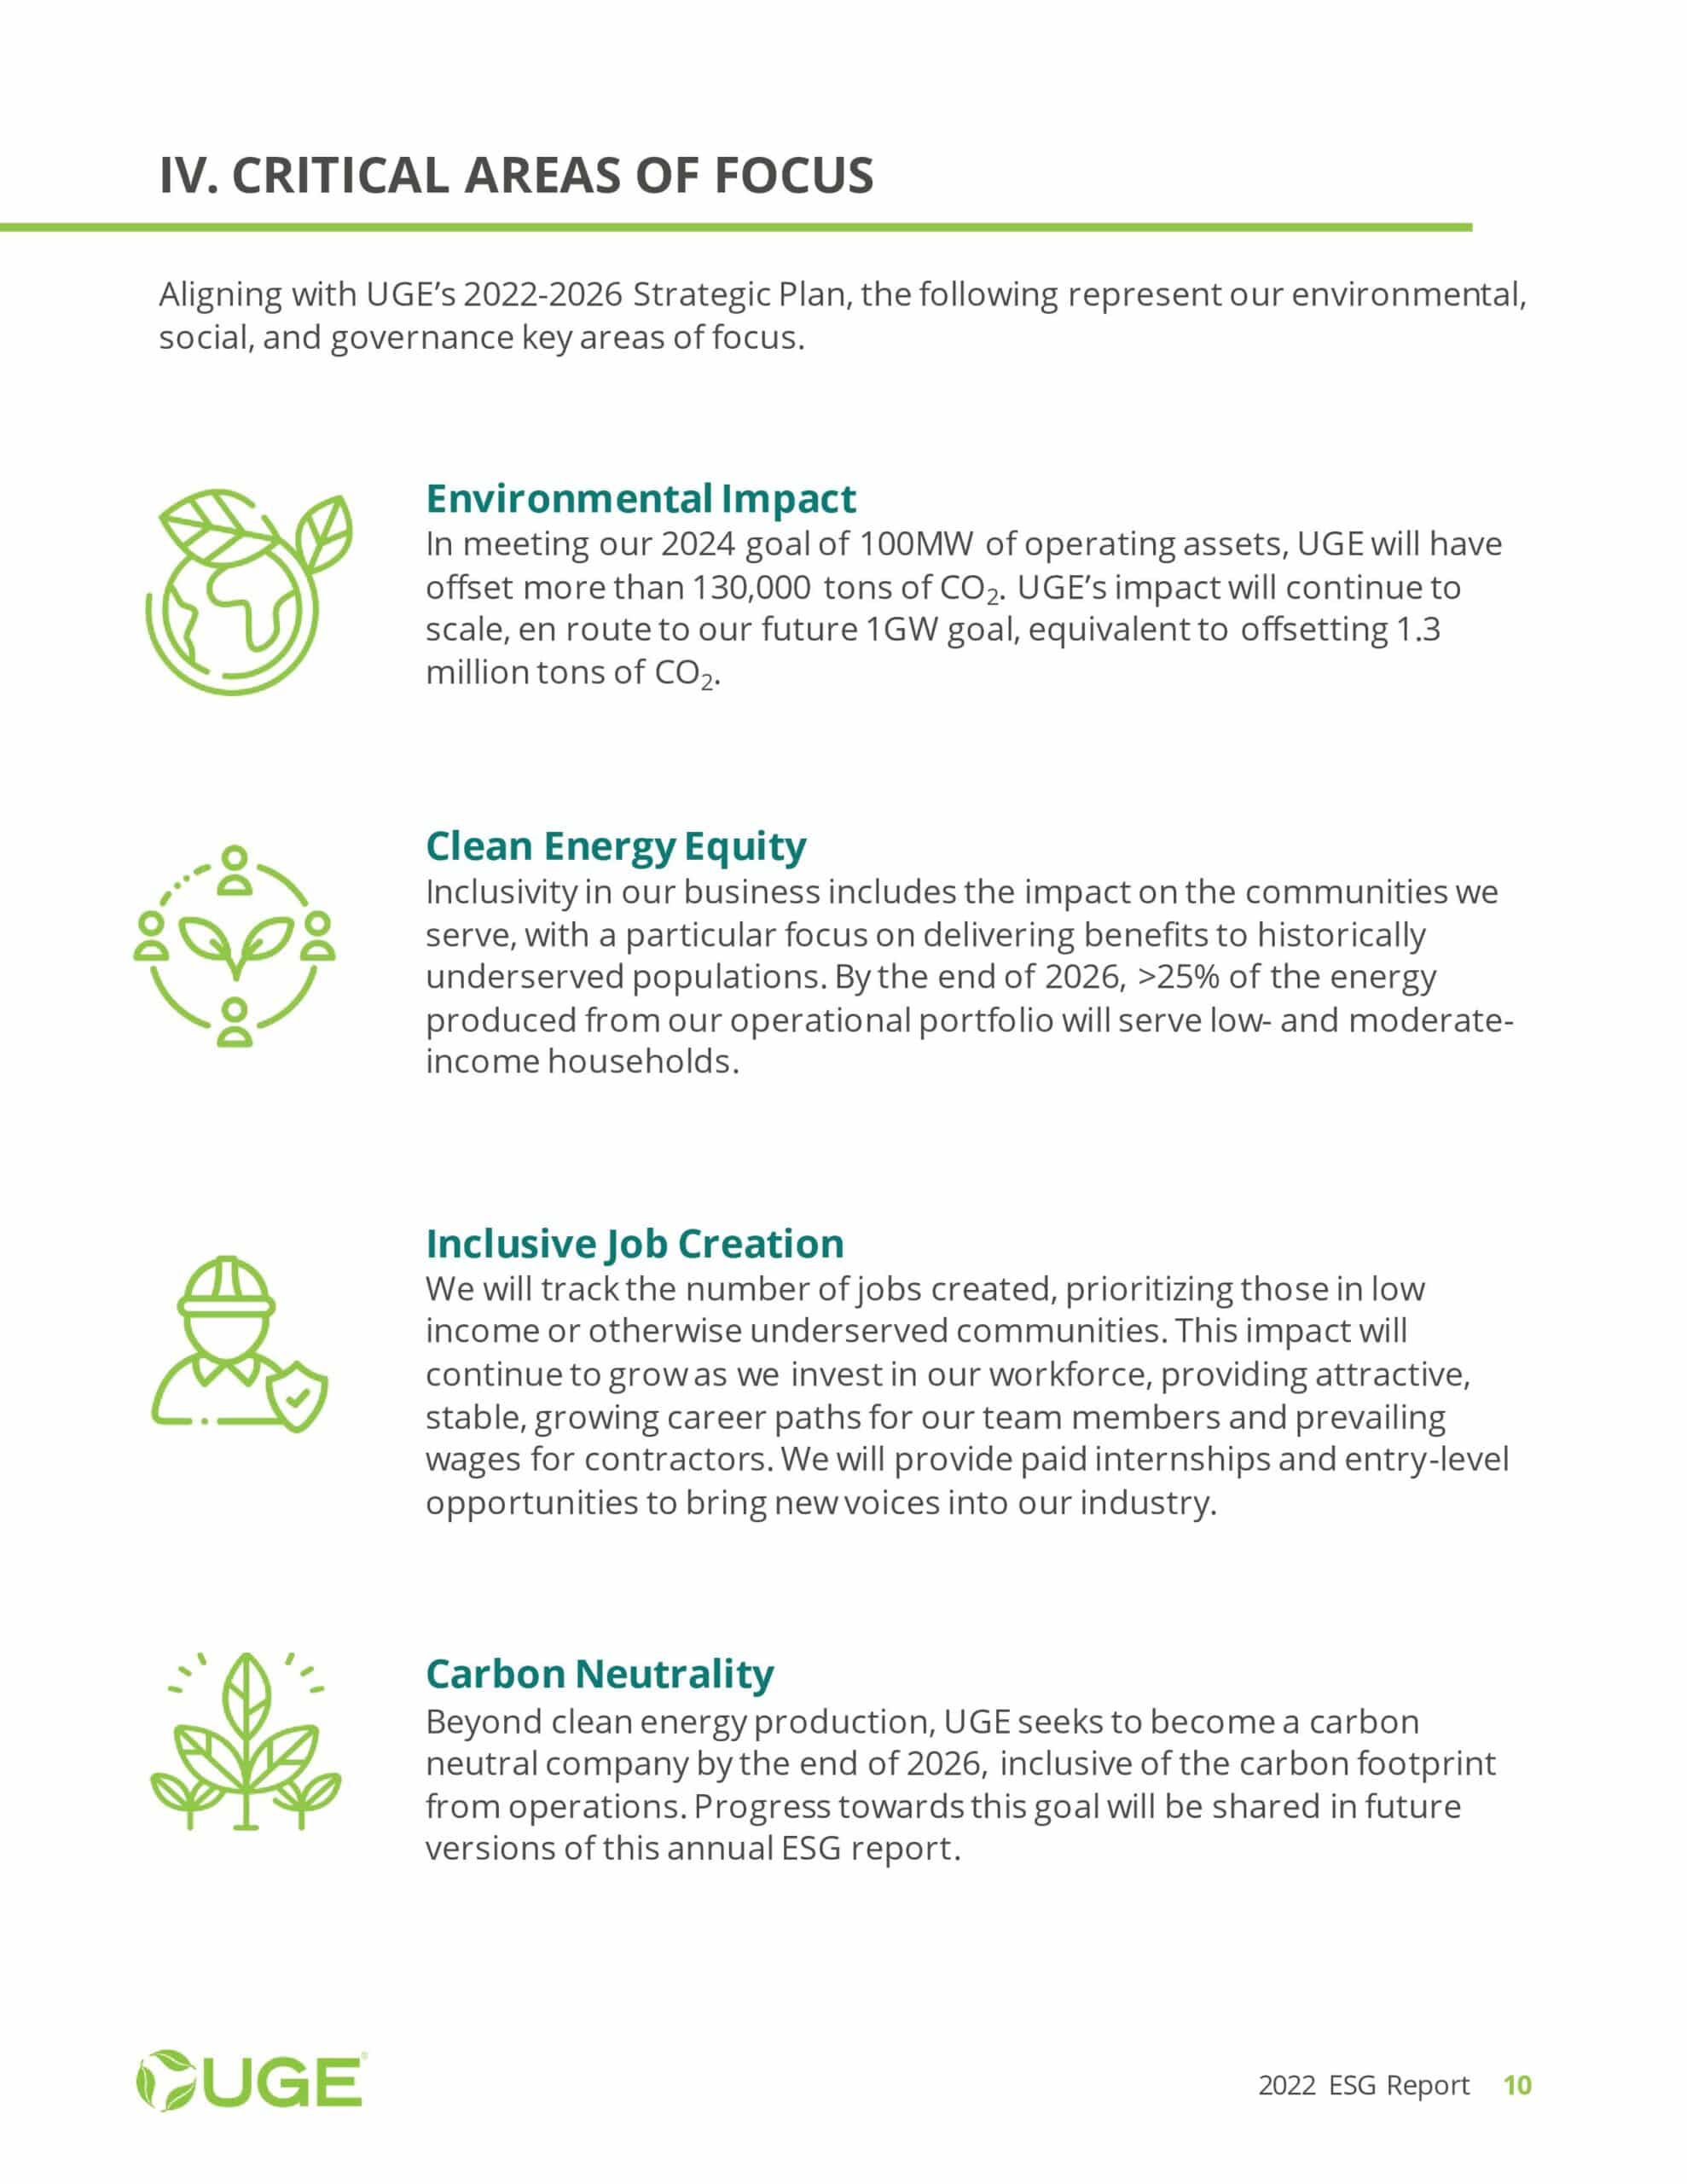 UGE ESG Report 2022-page-010